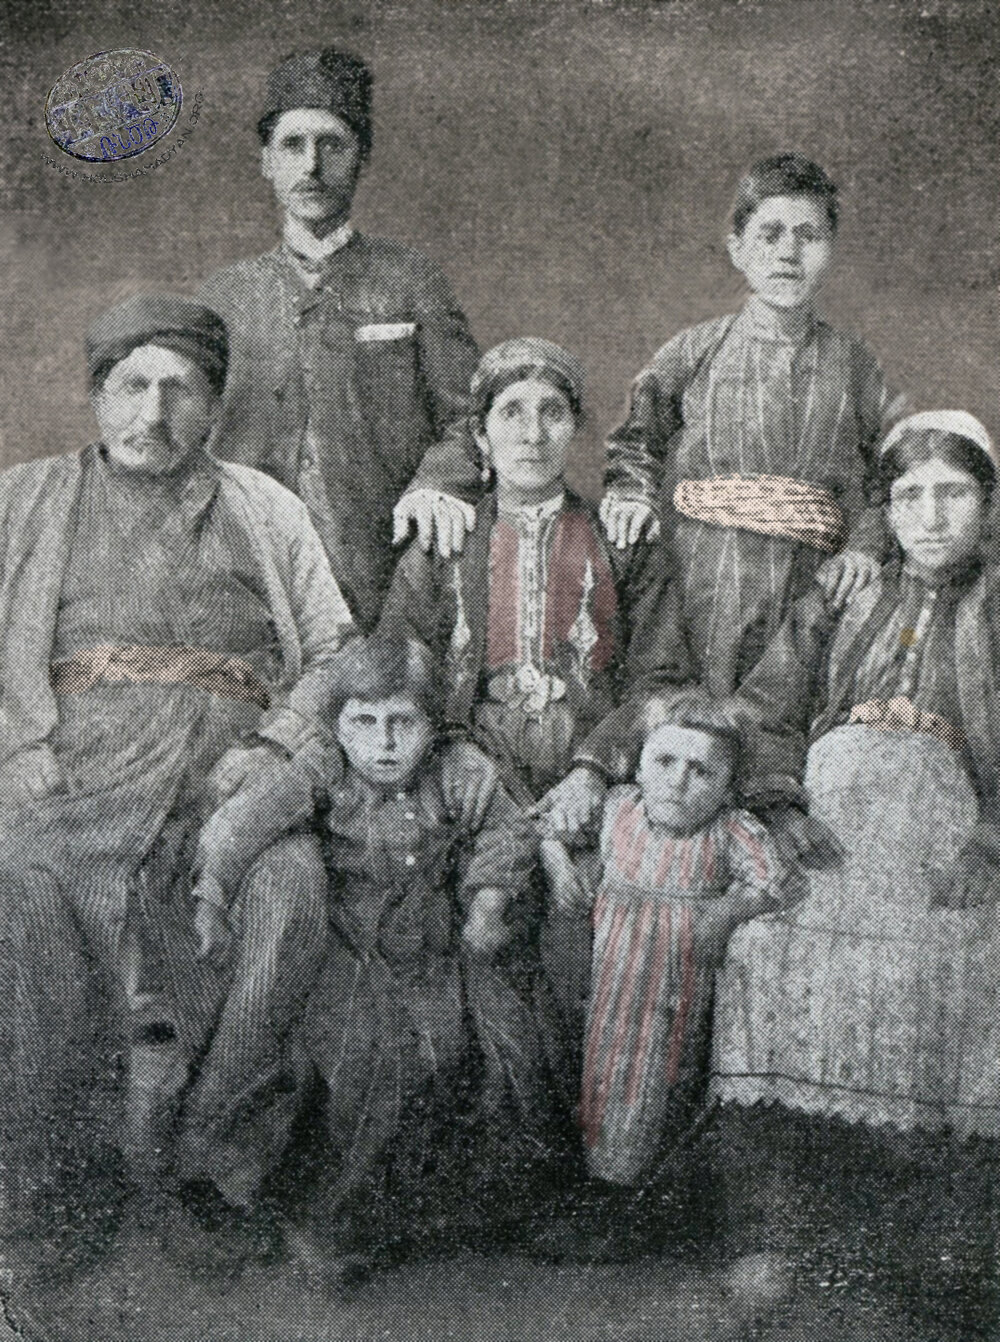 Hovagim Baghdasarian’s family from the village of Verin (Upper) Khokh